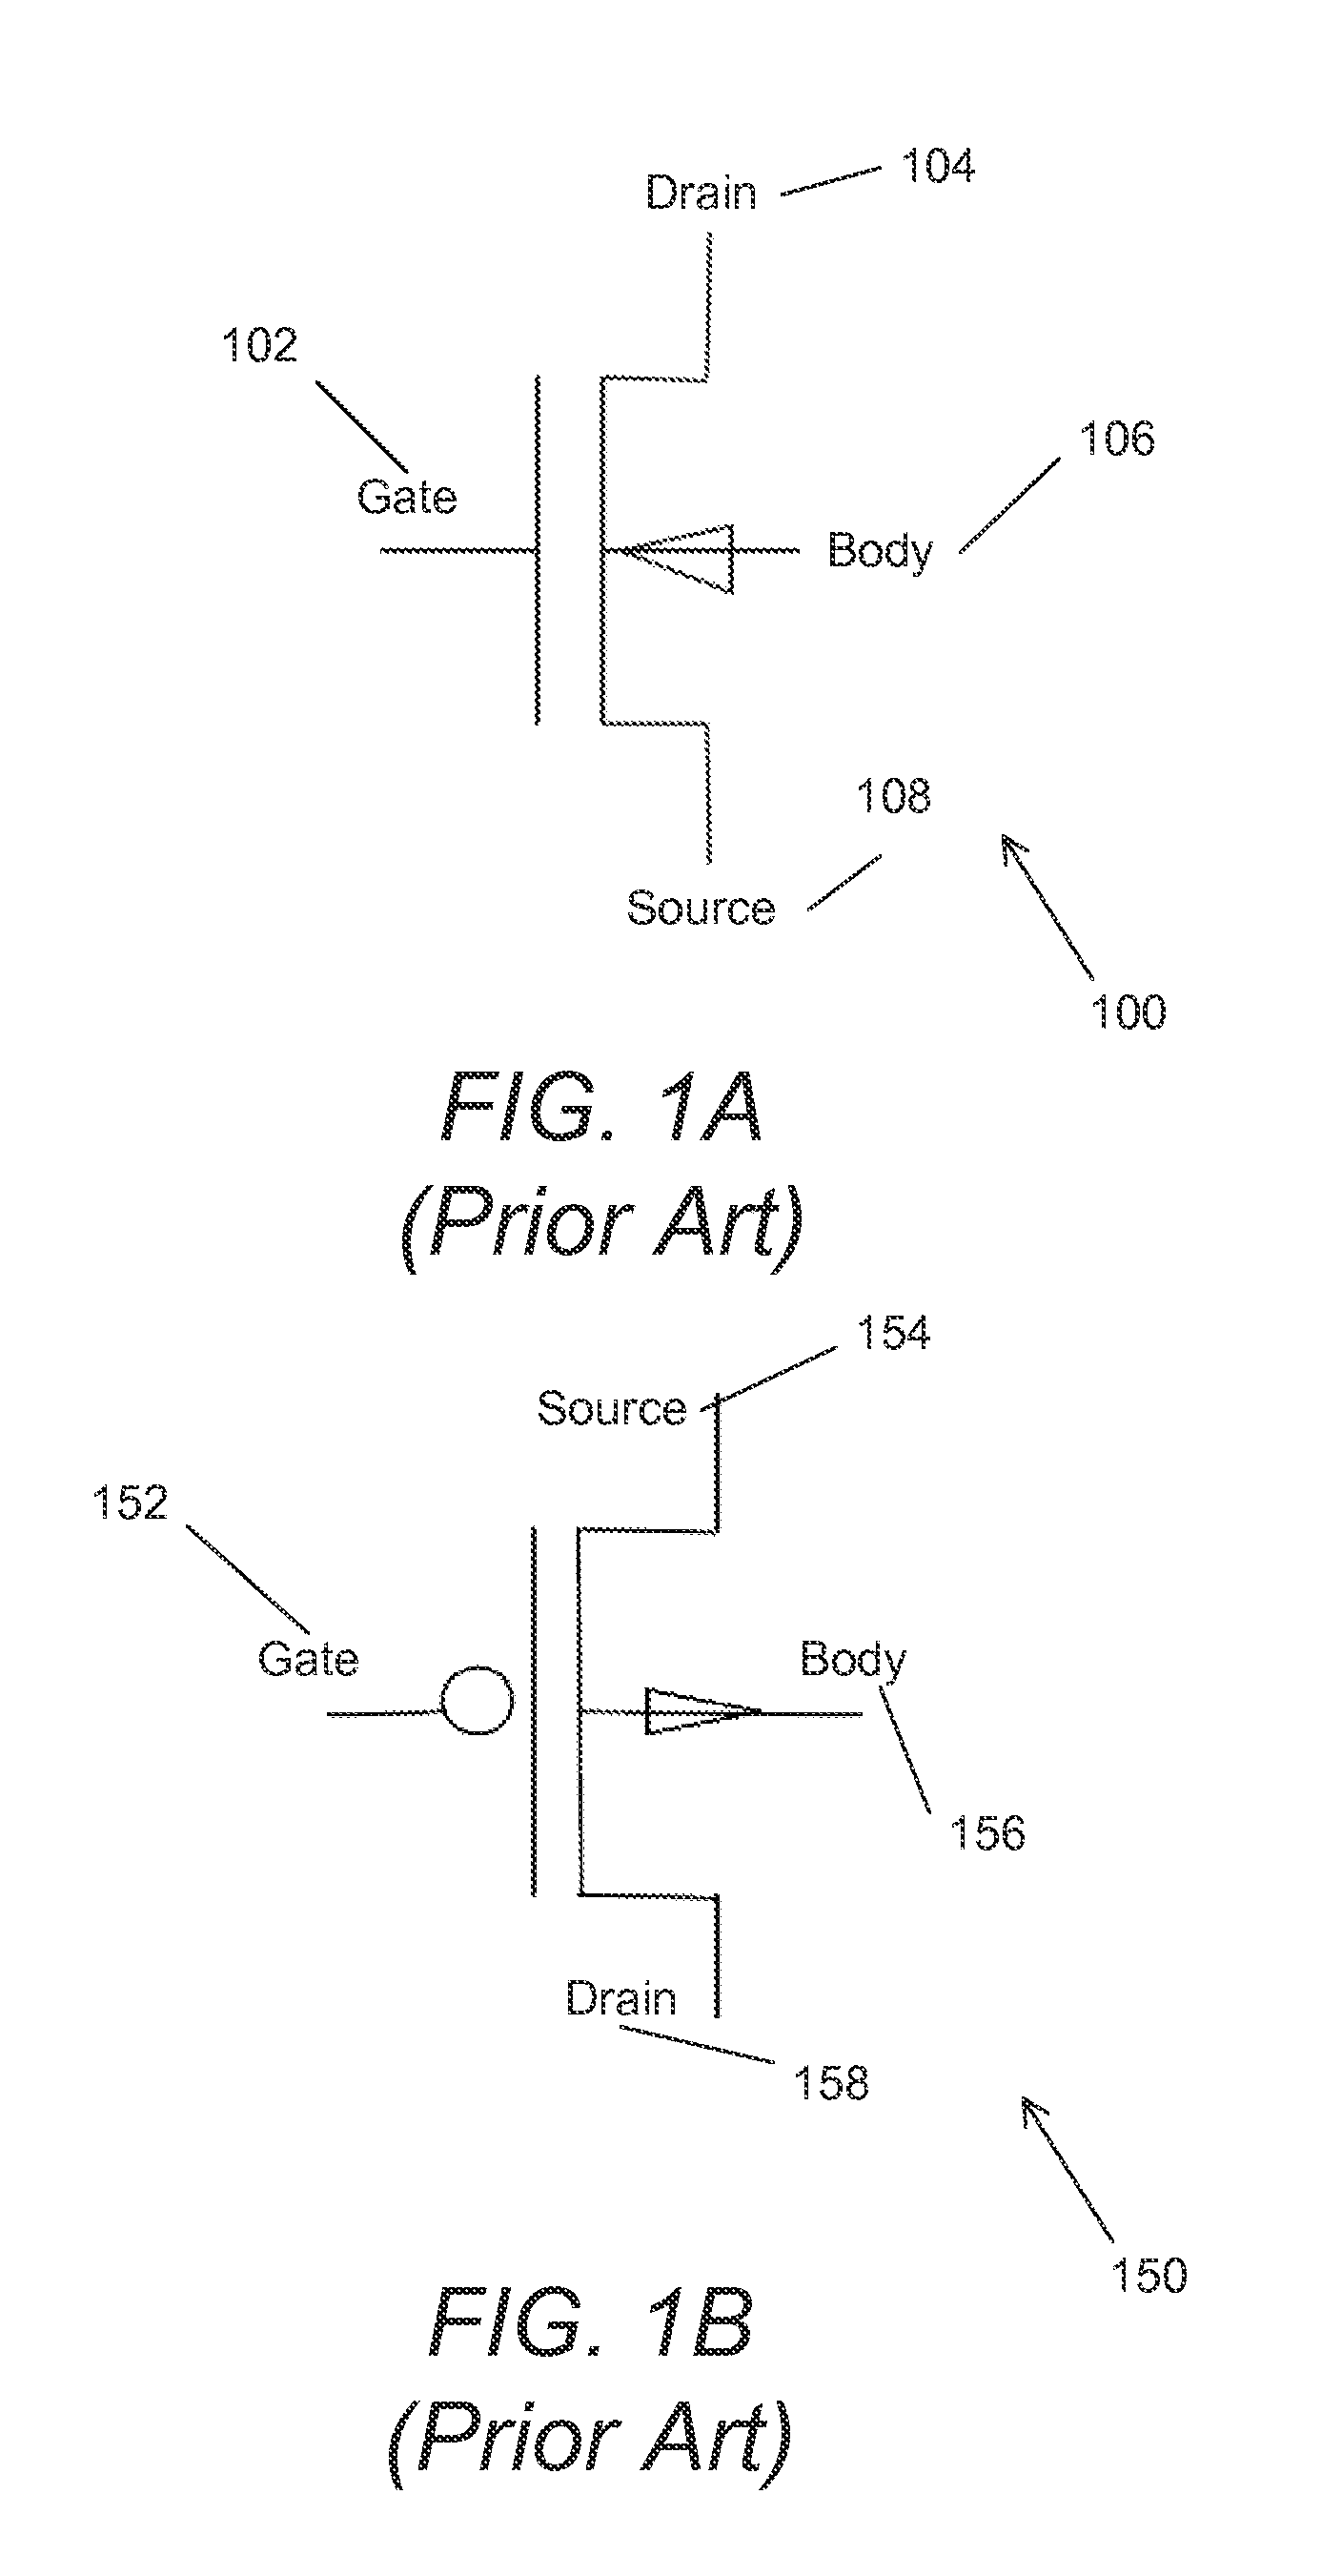 Systems and methods for dynamic mosfet body biasing for low power, fast response VLSI applications